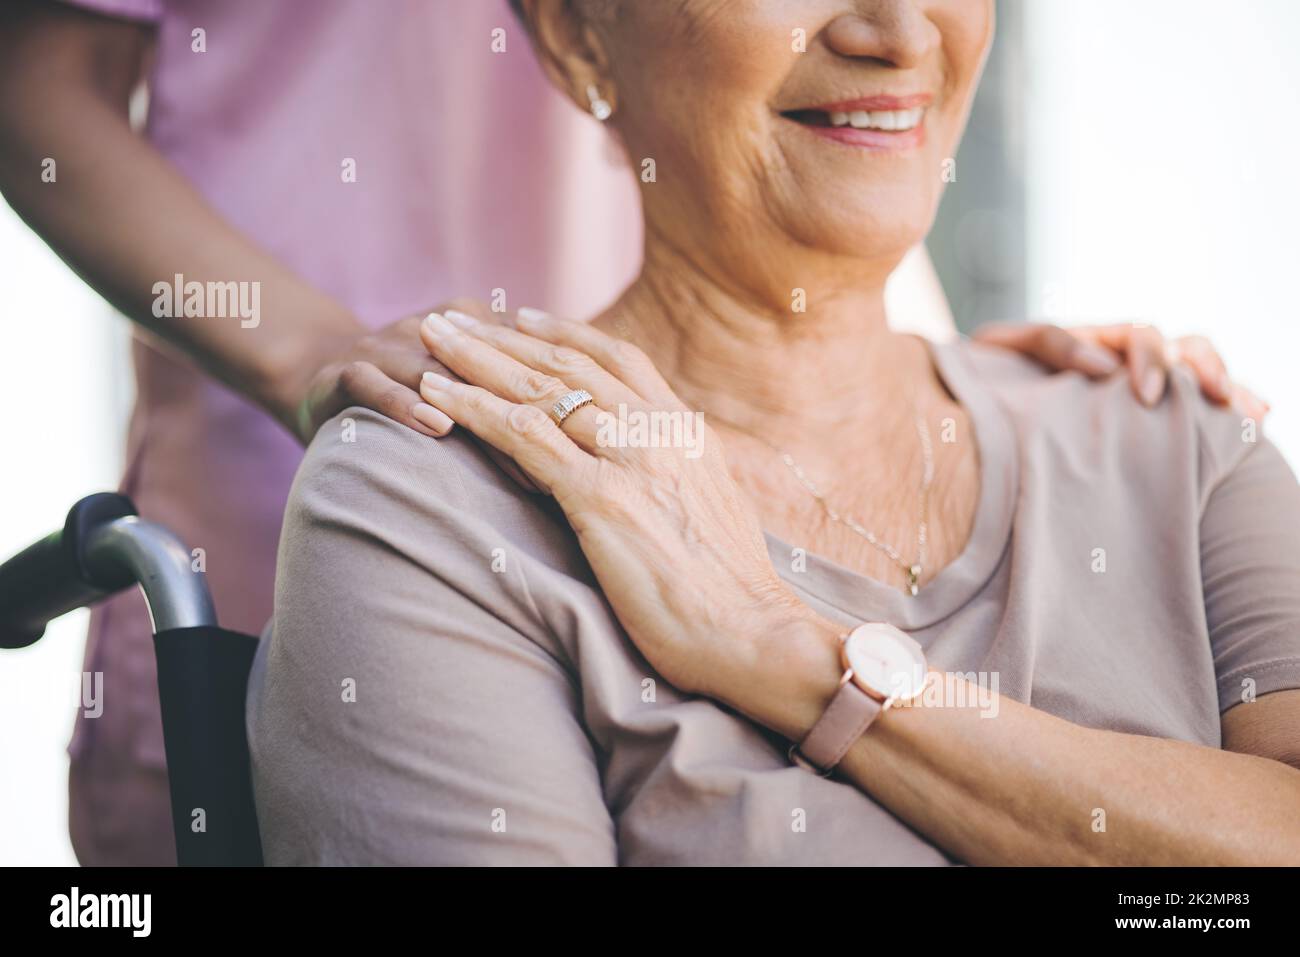 A bond of ages. Cropped shot of a nurse caring for an older woman in a wheelchair. Stock Photo